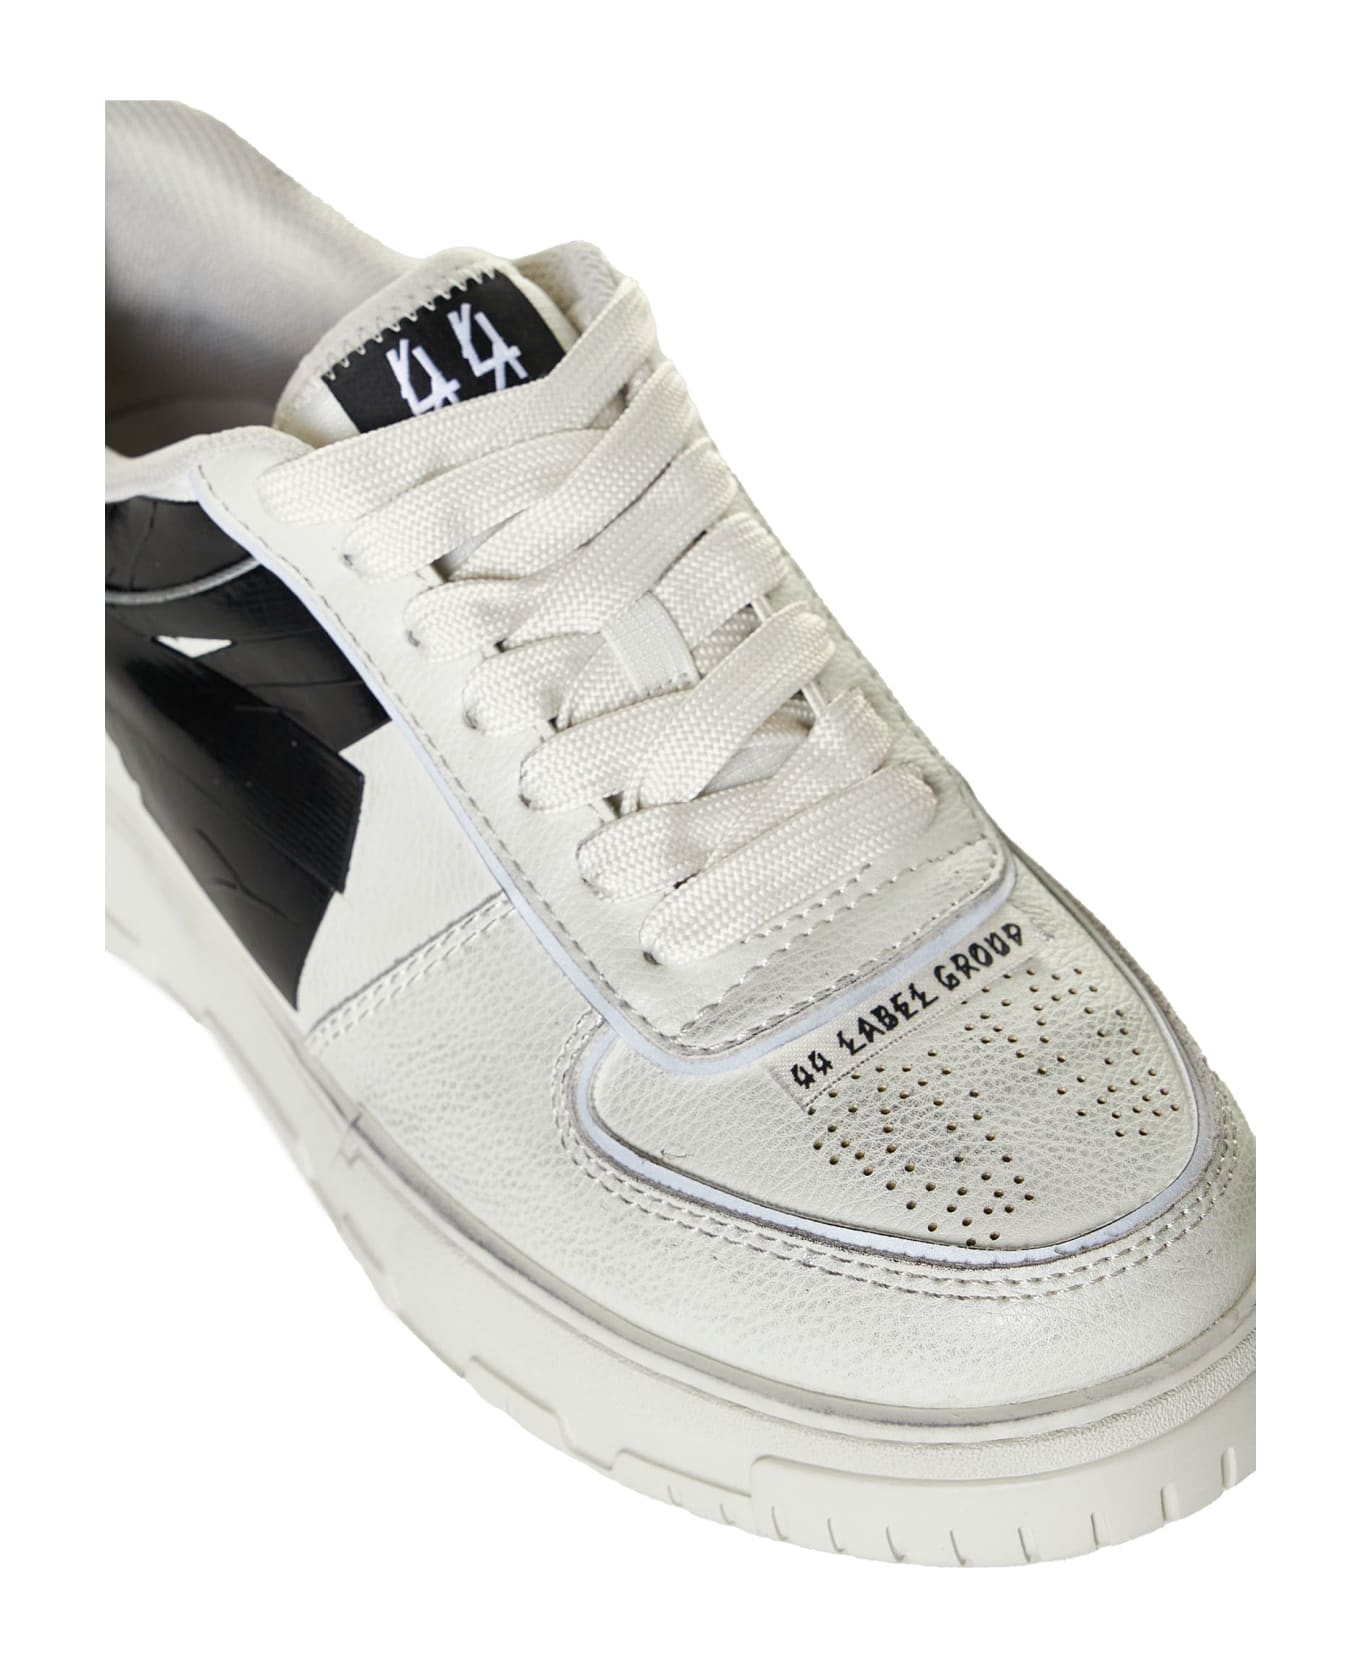 44 Label Group Sneakers - Pu blend スニーカー